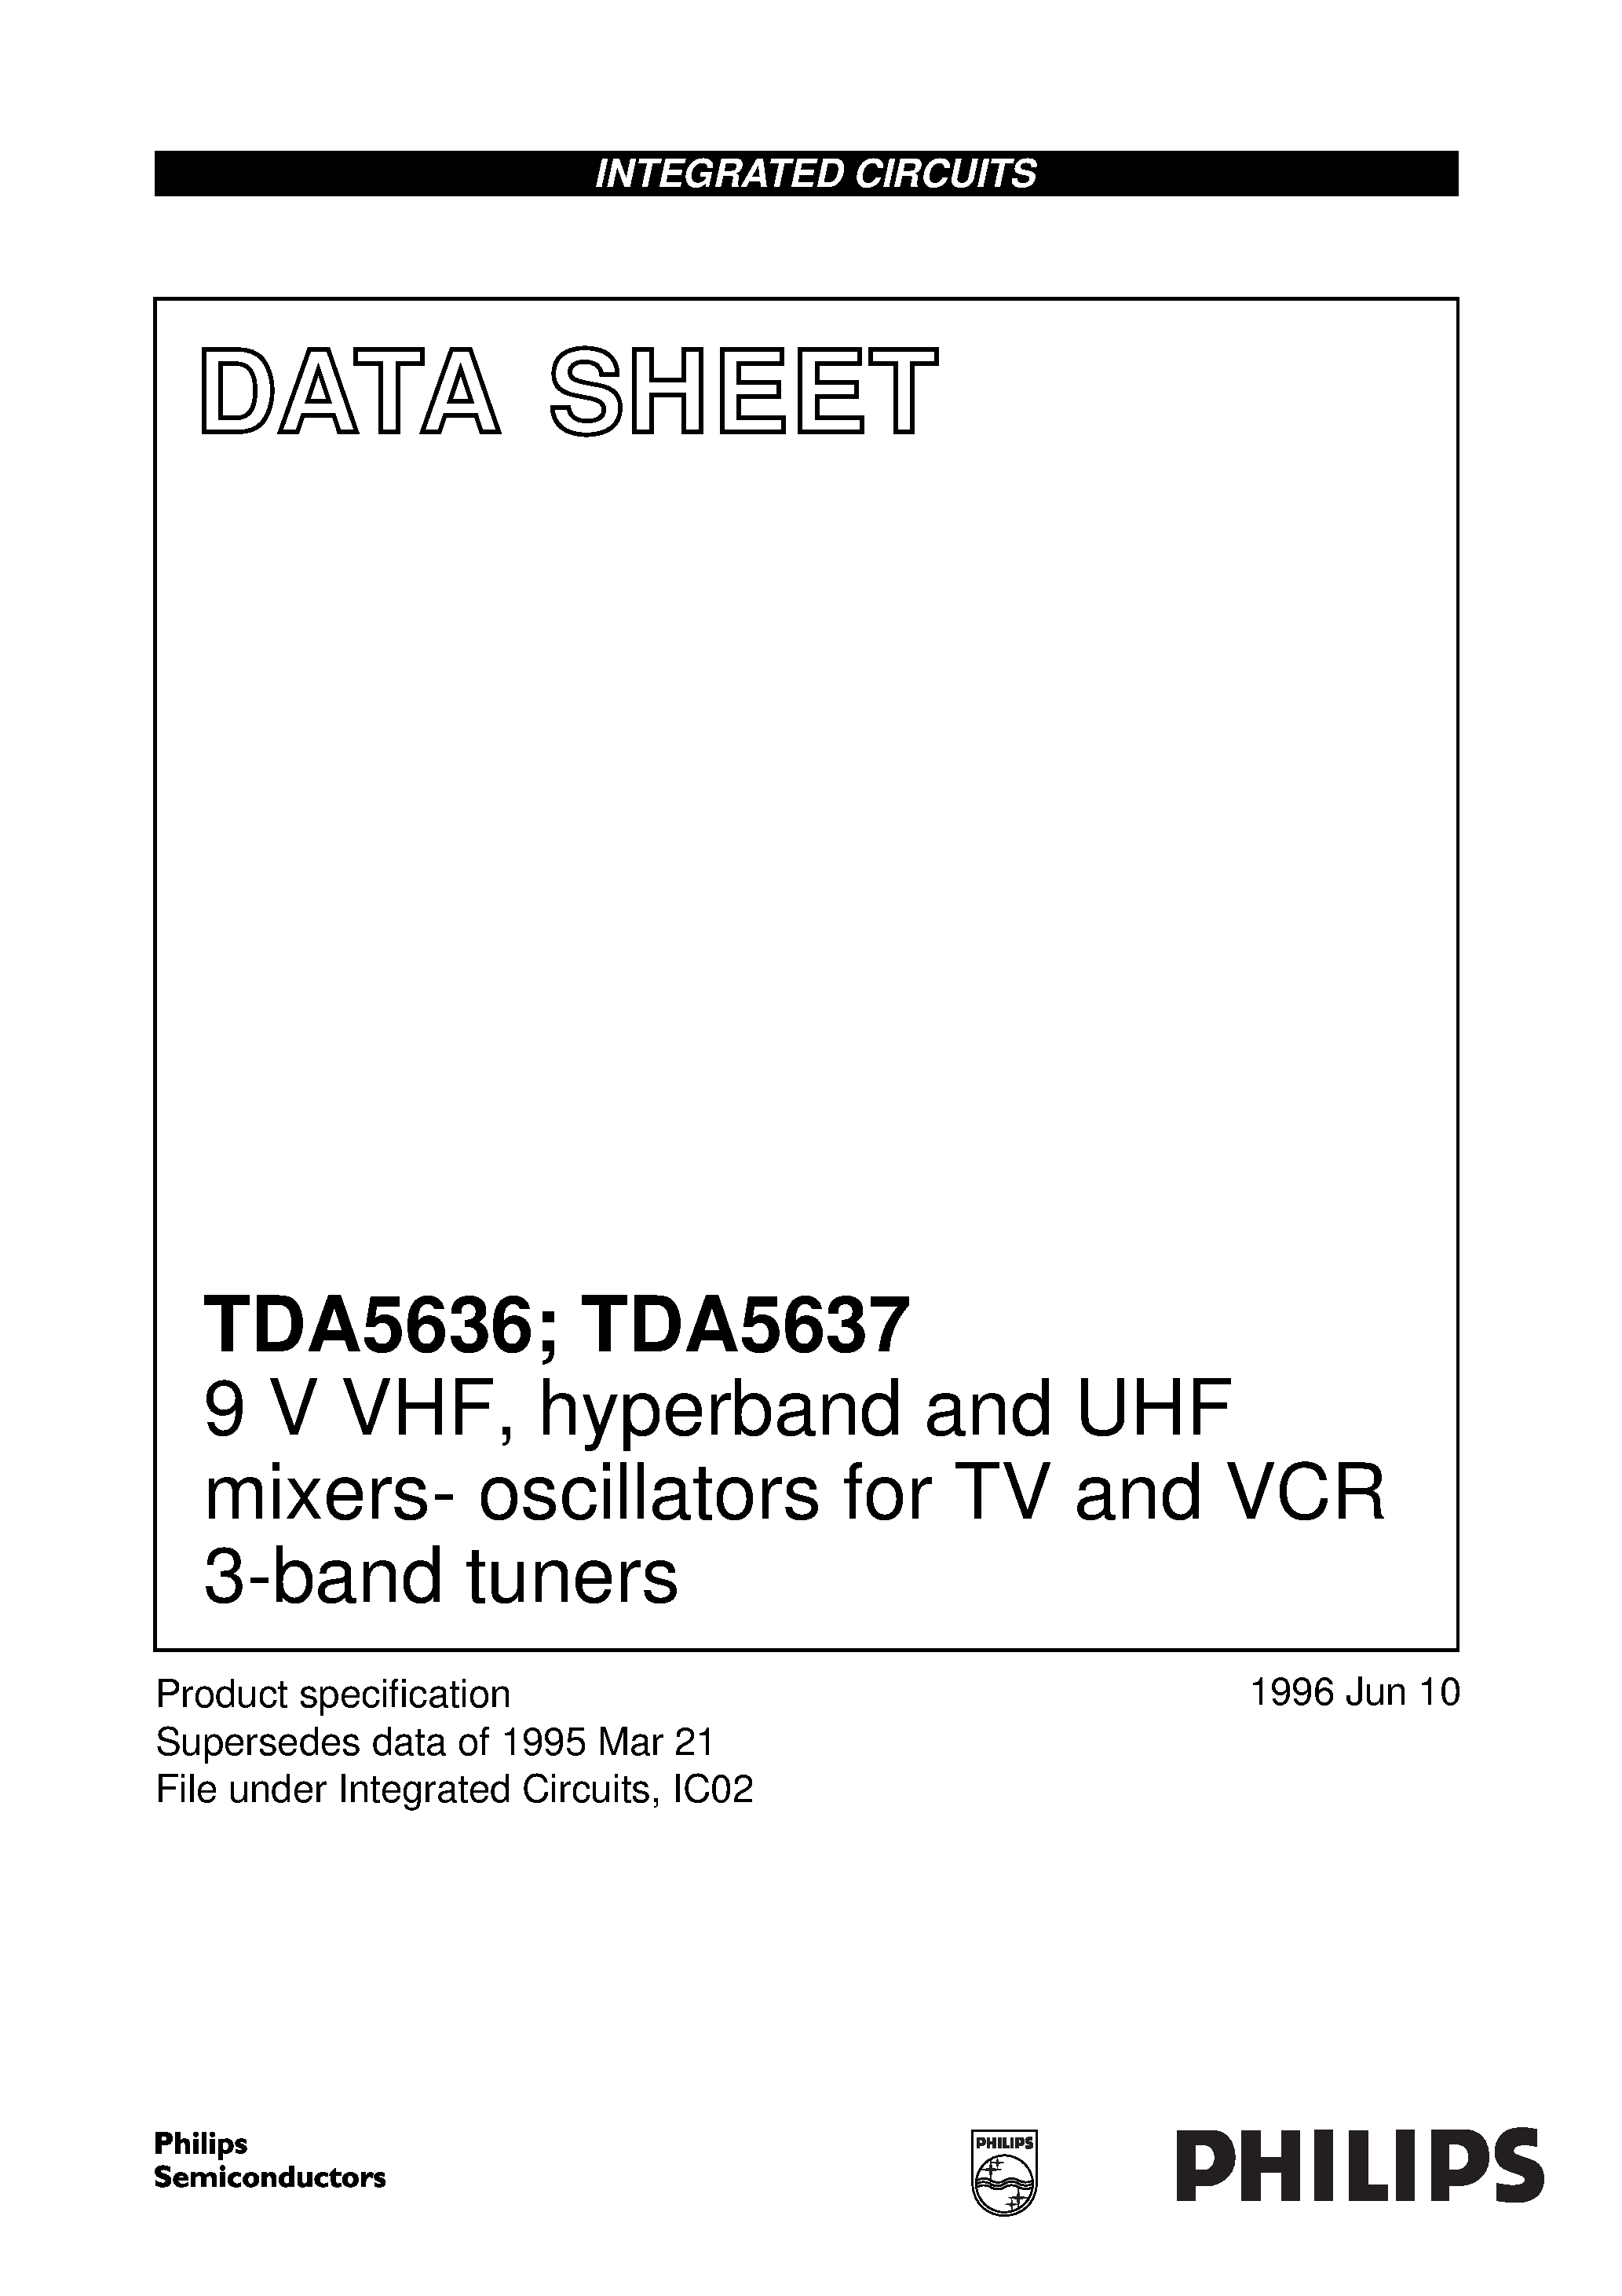 Даташит TDA5637 - 9 V VHF/ hyperband and UHF mixers- oscillators for TV and VCR 3-band tuners страница 1